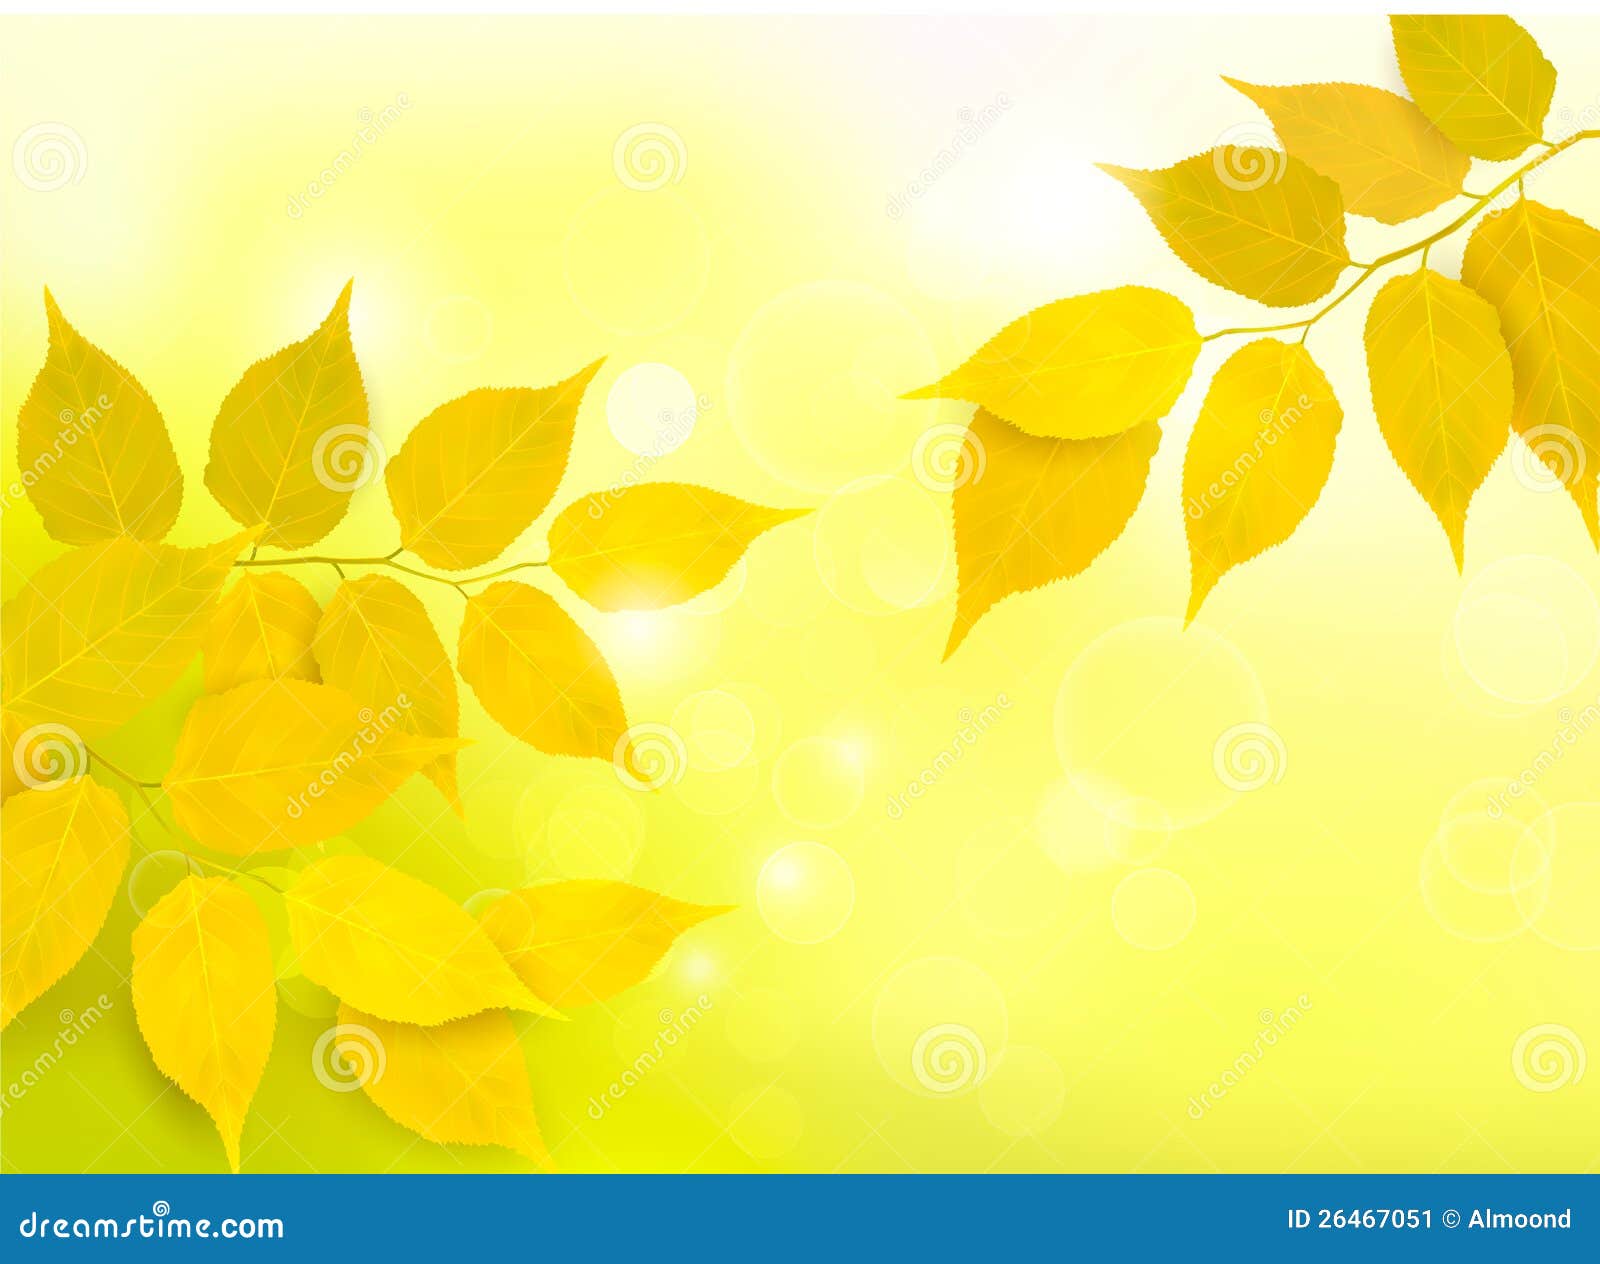 Nature Background with Autumn Yellow Leaves Stock Vector - Illustration of  brochure, natural: 26467051